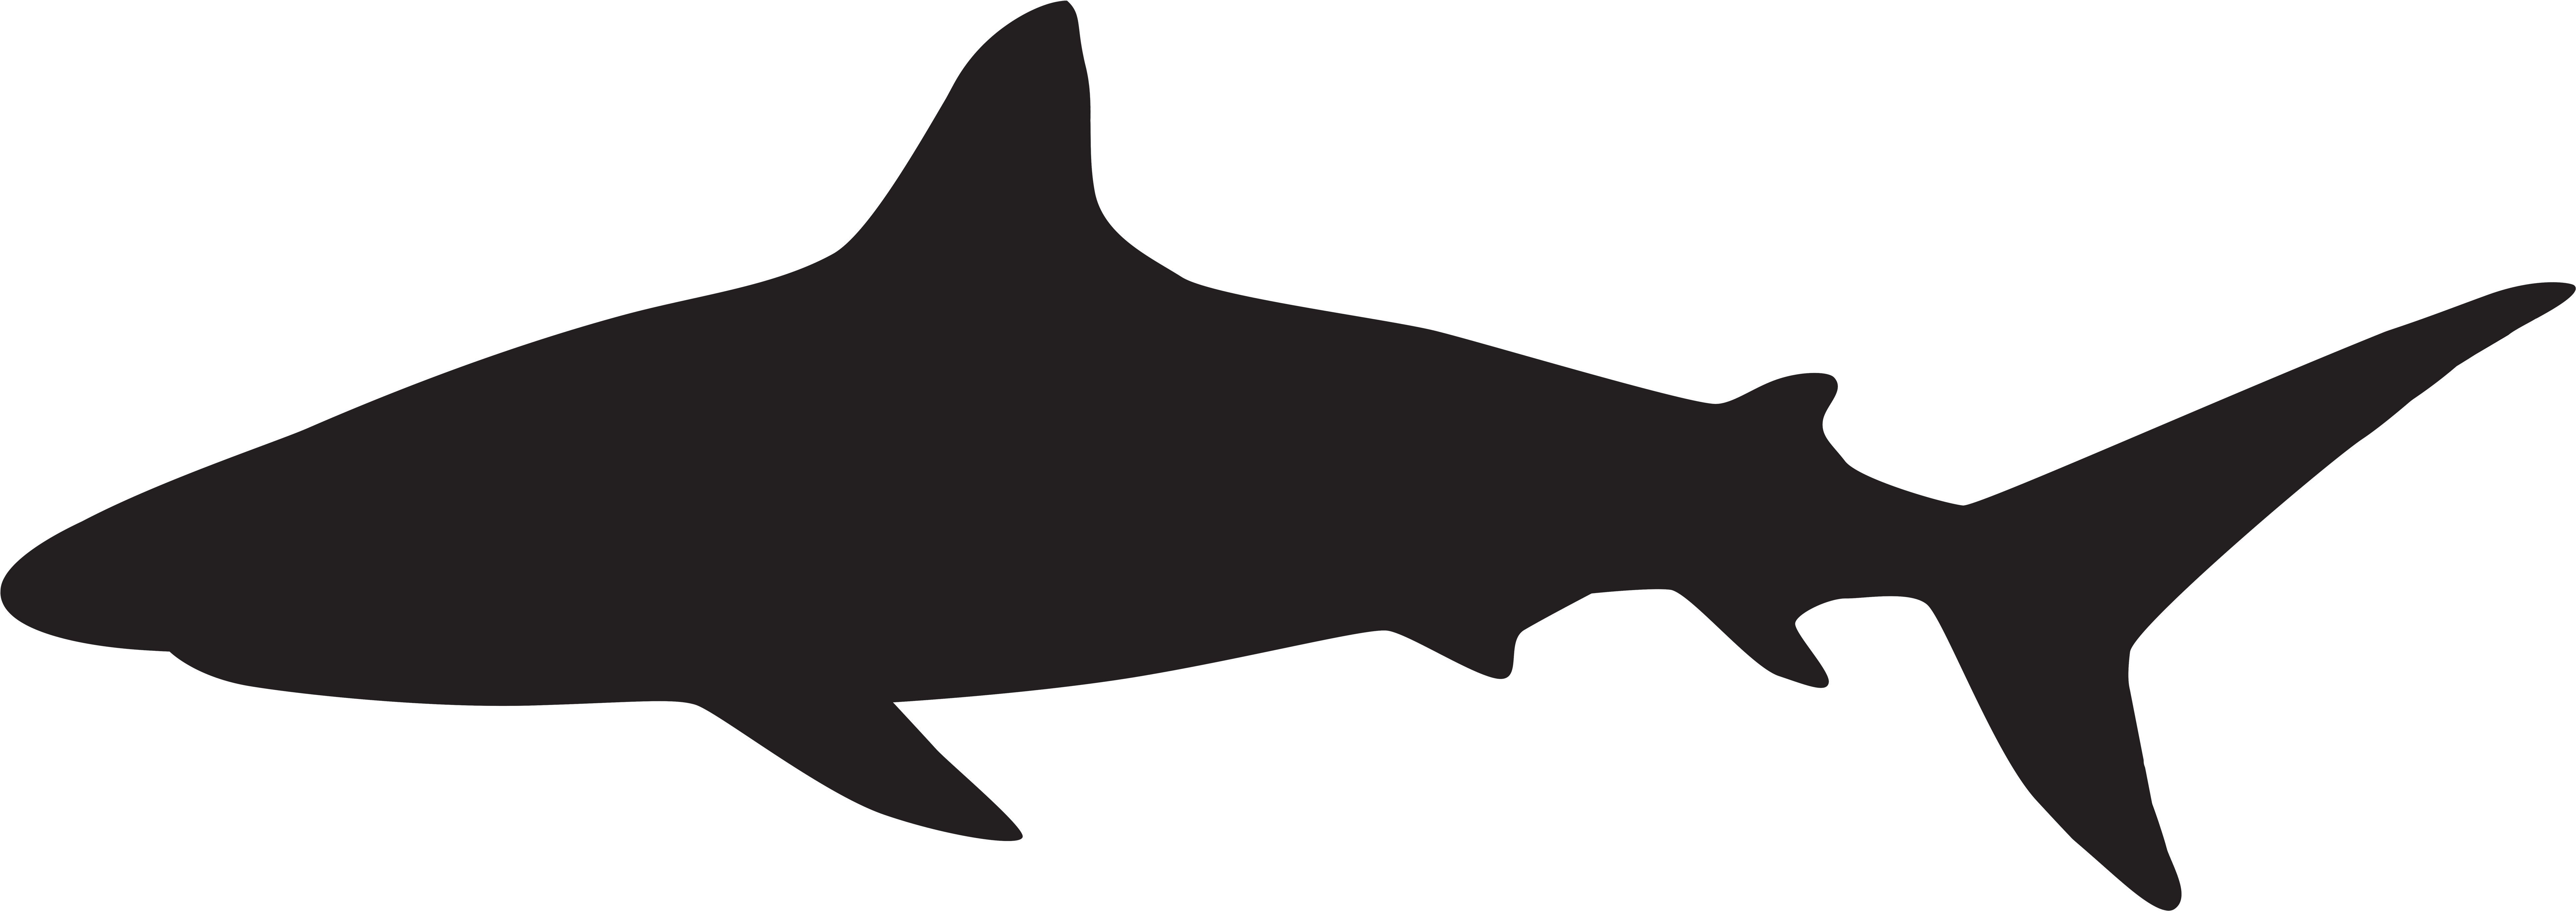 Shark Silhouette Png Clip Art Image - Shark Silhouette Png Transparent Png (8000x2808), Png Download